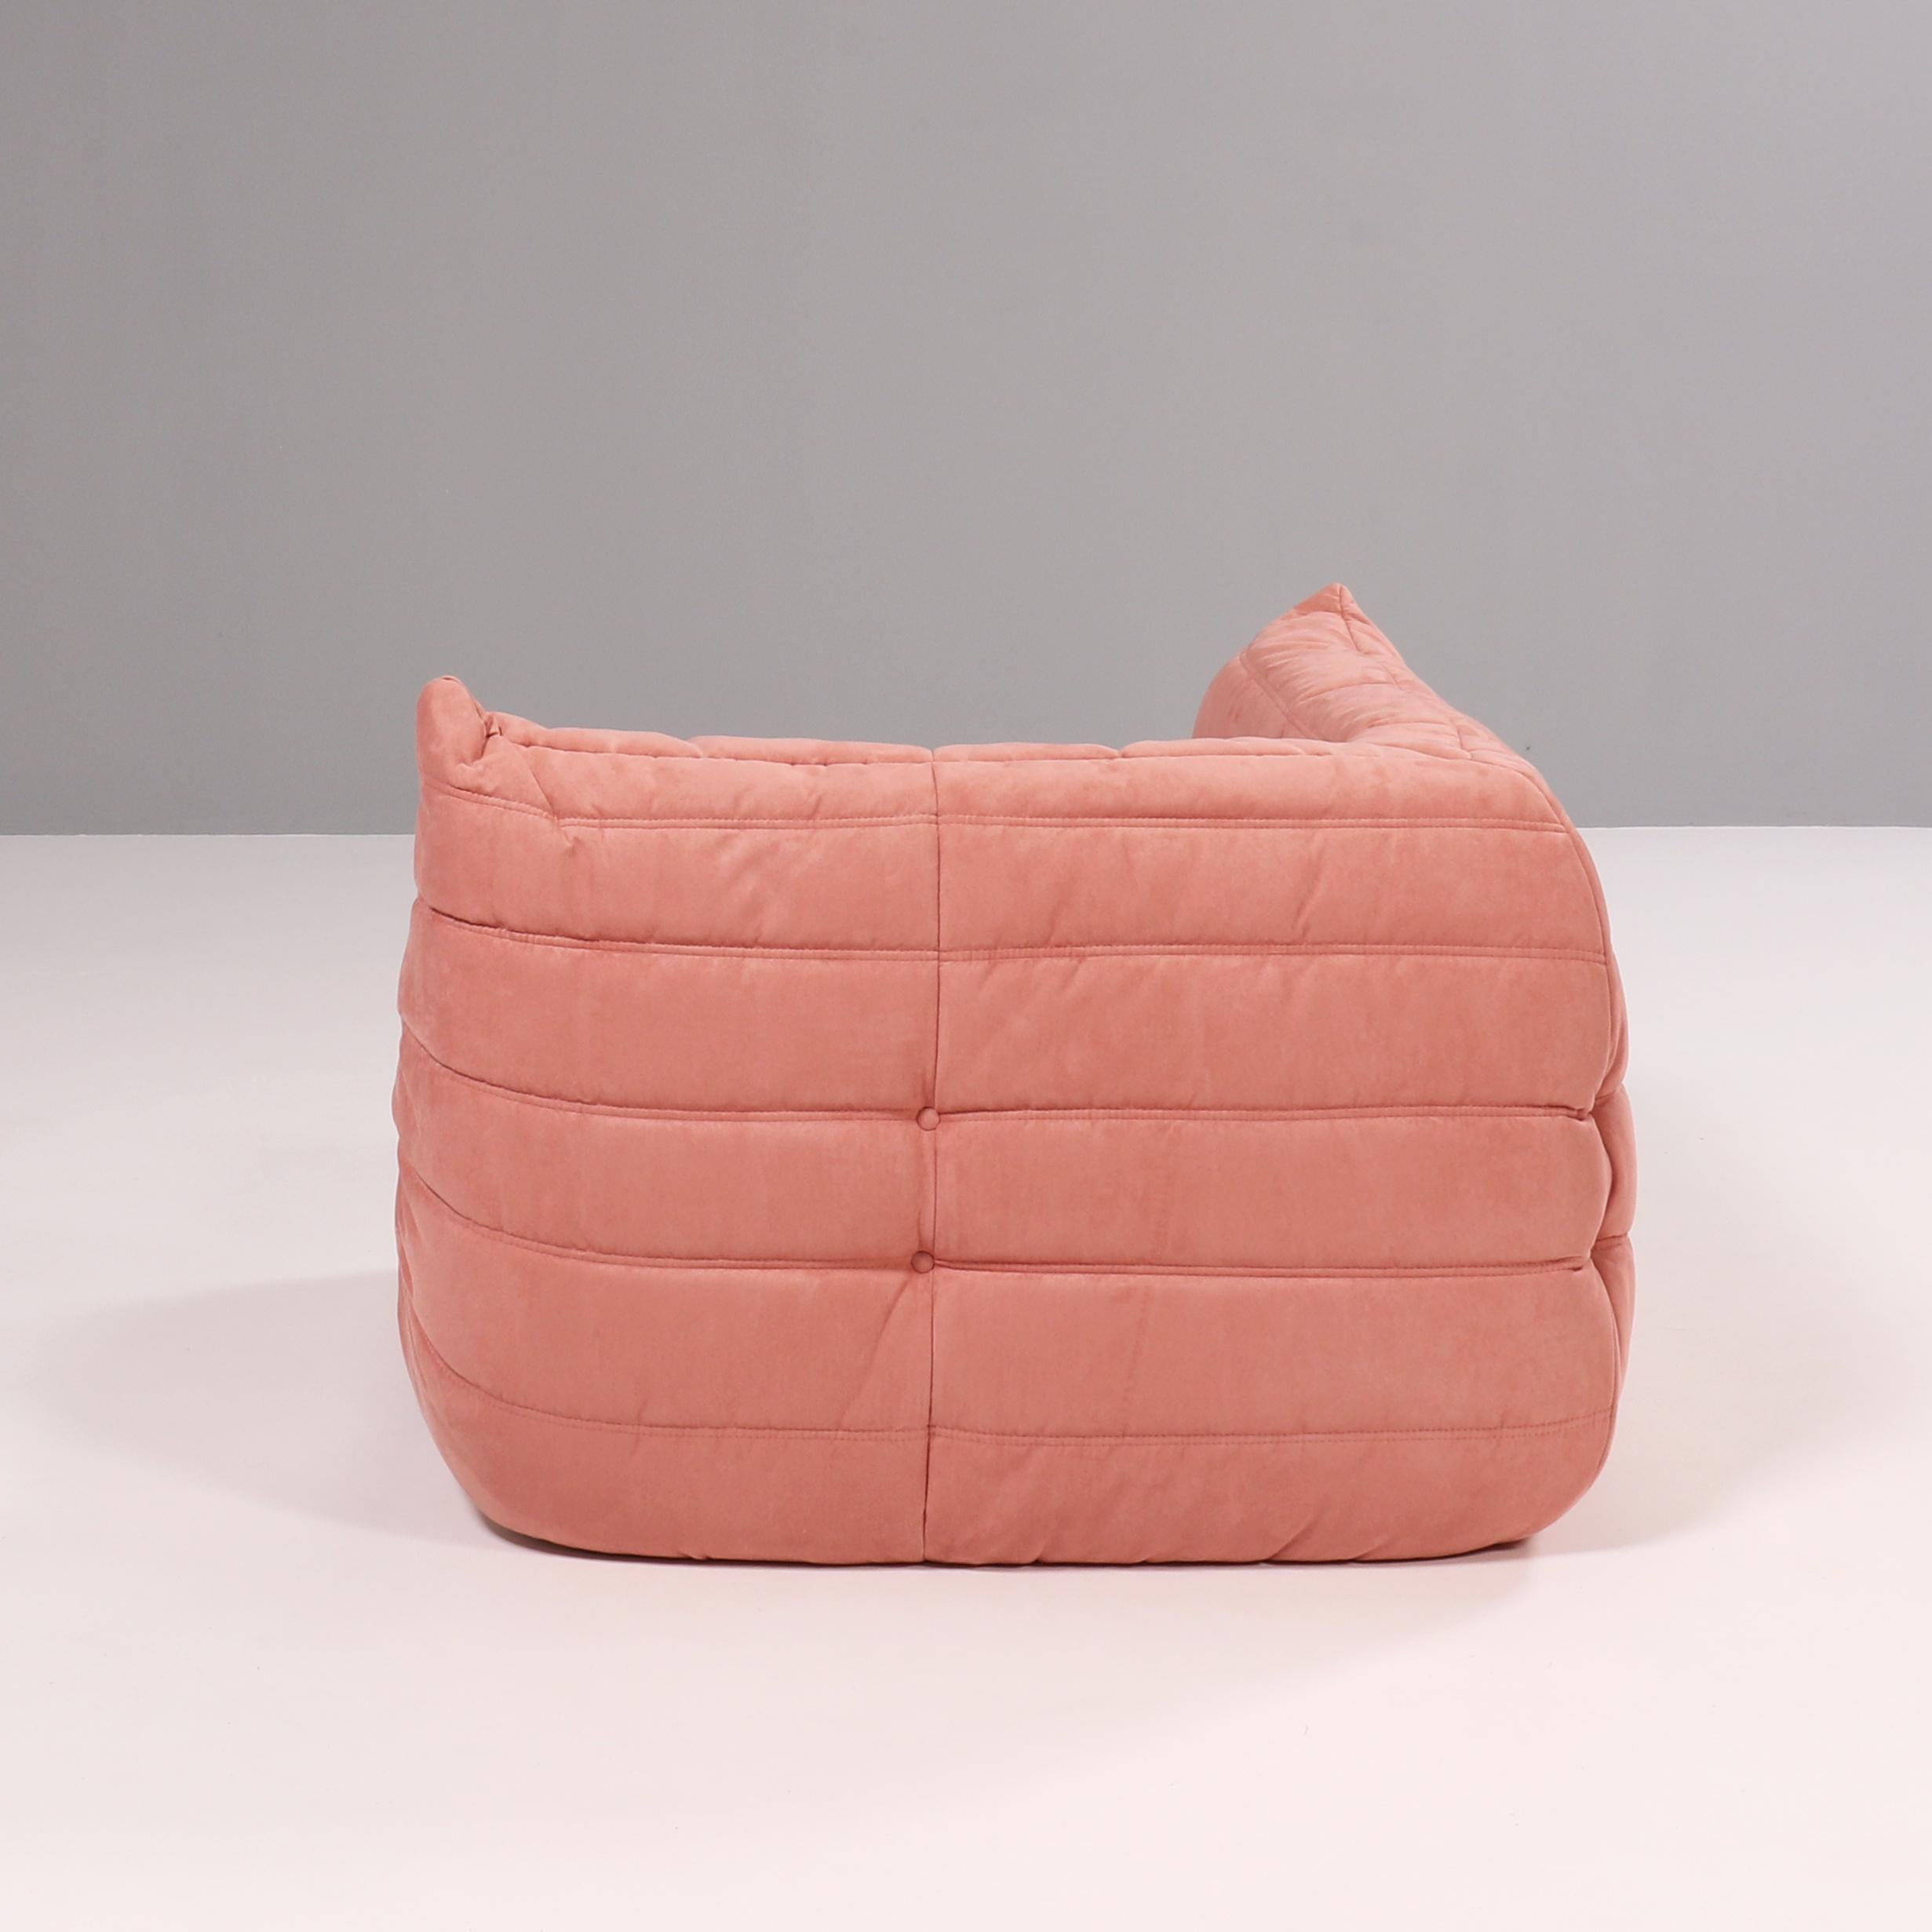 Ligne Roset by Michel Ducaroy Togo Pink Corner Modular Sofa, Set of 3 In Good Condition For Sale In London, GB